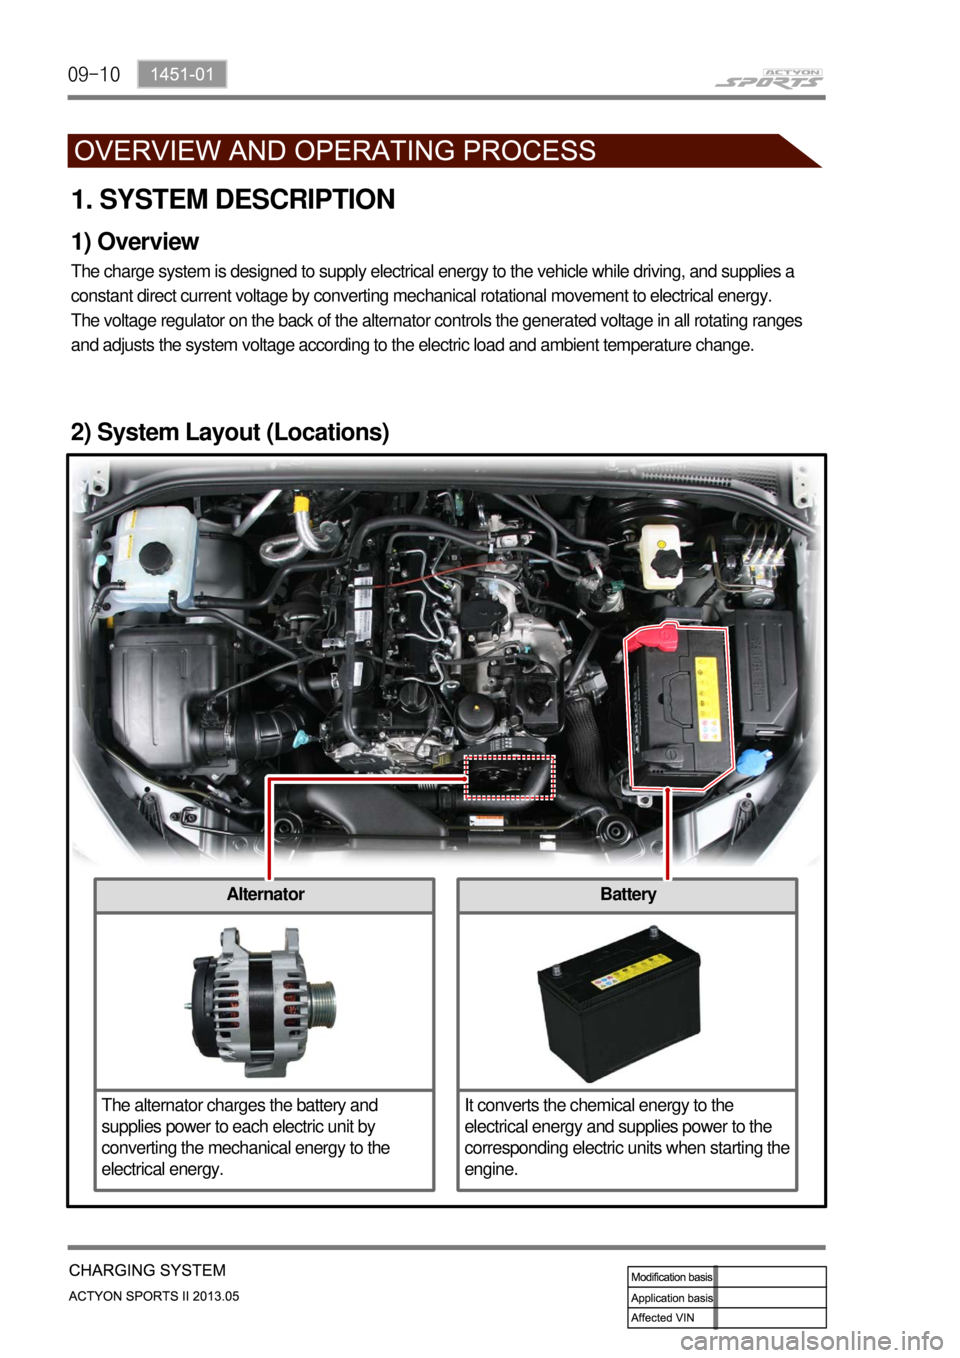 SSANGYONG NEW ACTYON SPORTS 2013  Service Manual 09-10
Alternator
The alternator charges the battery and 
supplies power to each electric unit by 
converting the mechanical energy to the 
electrical energy.
1. SYSTEM DESCRIPTION
1) Overview
The char